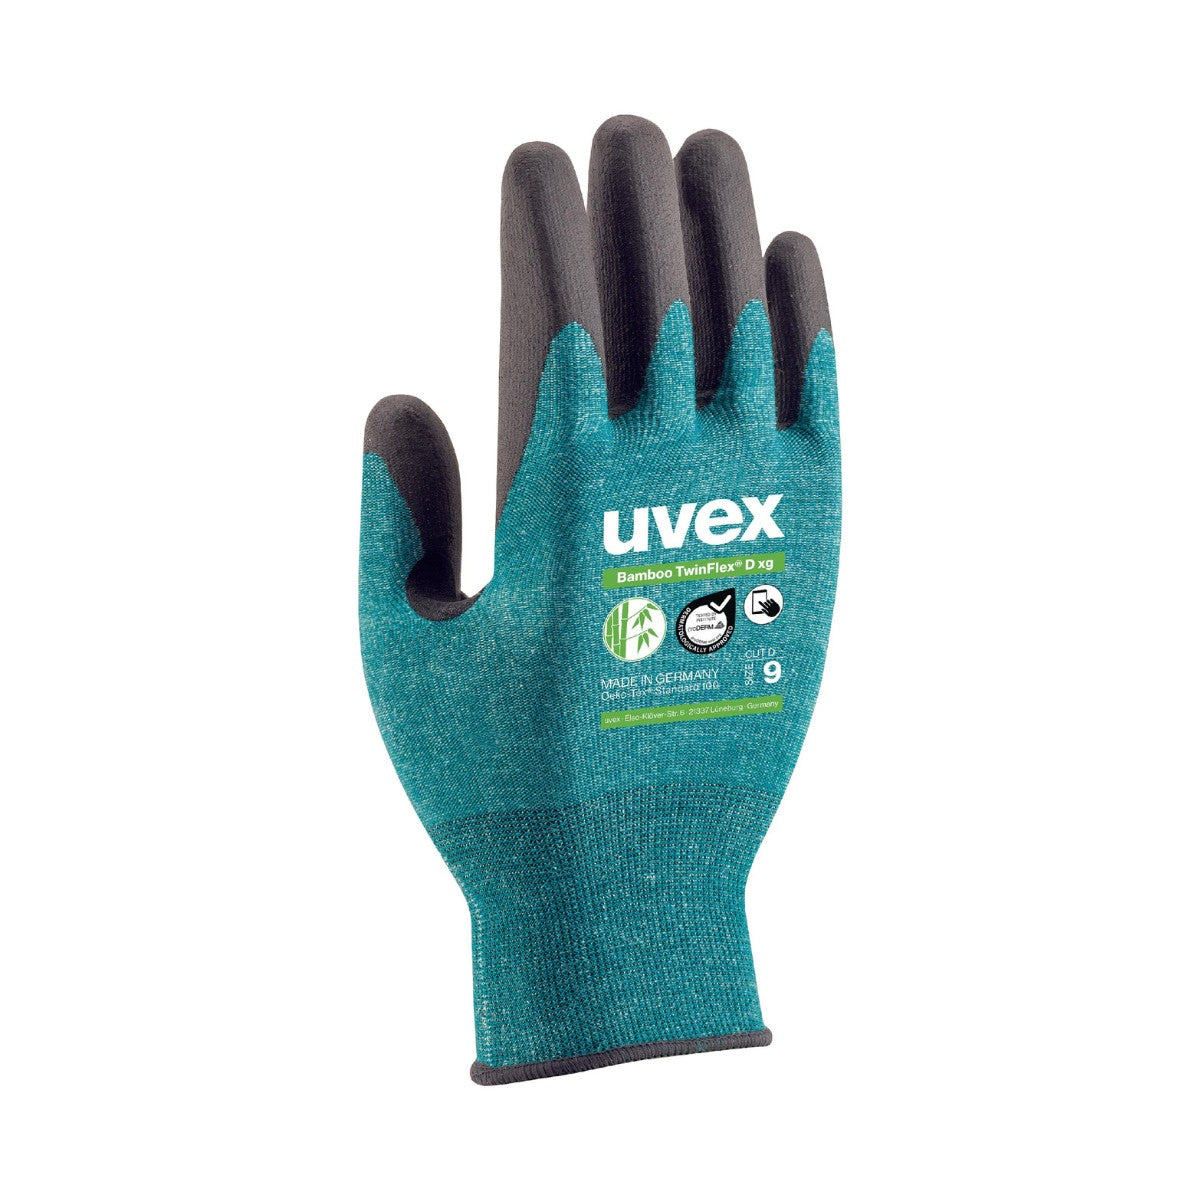 uvex Bamboo TwinFlex® D xg Cut Protection Gloves 60090 (Box of 10)